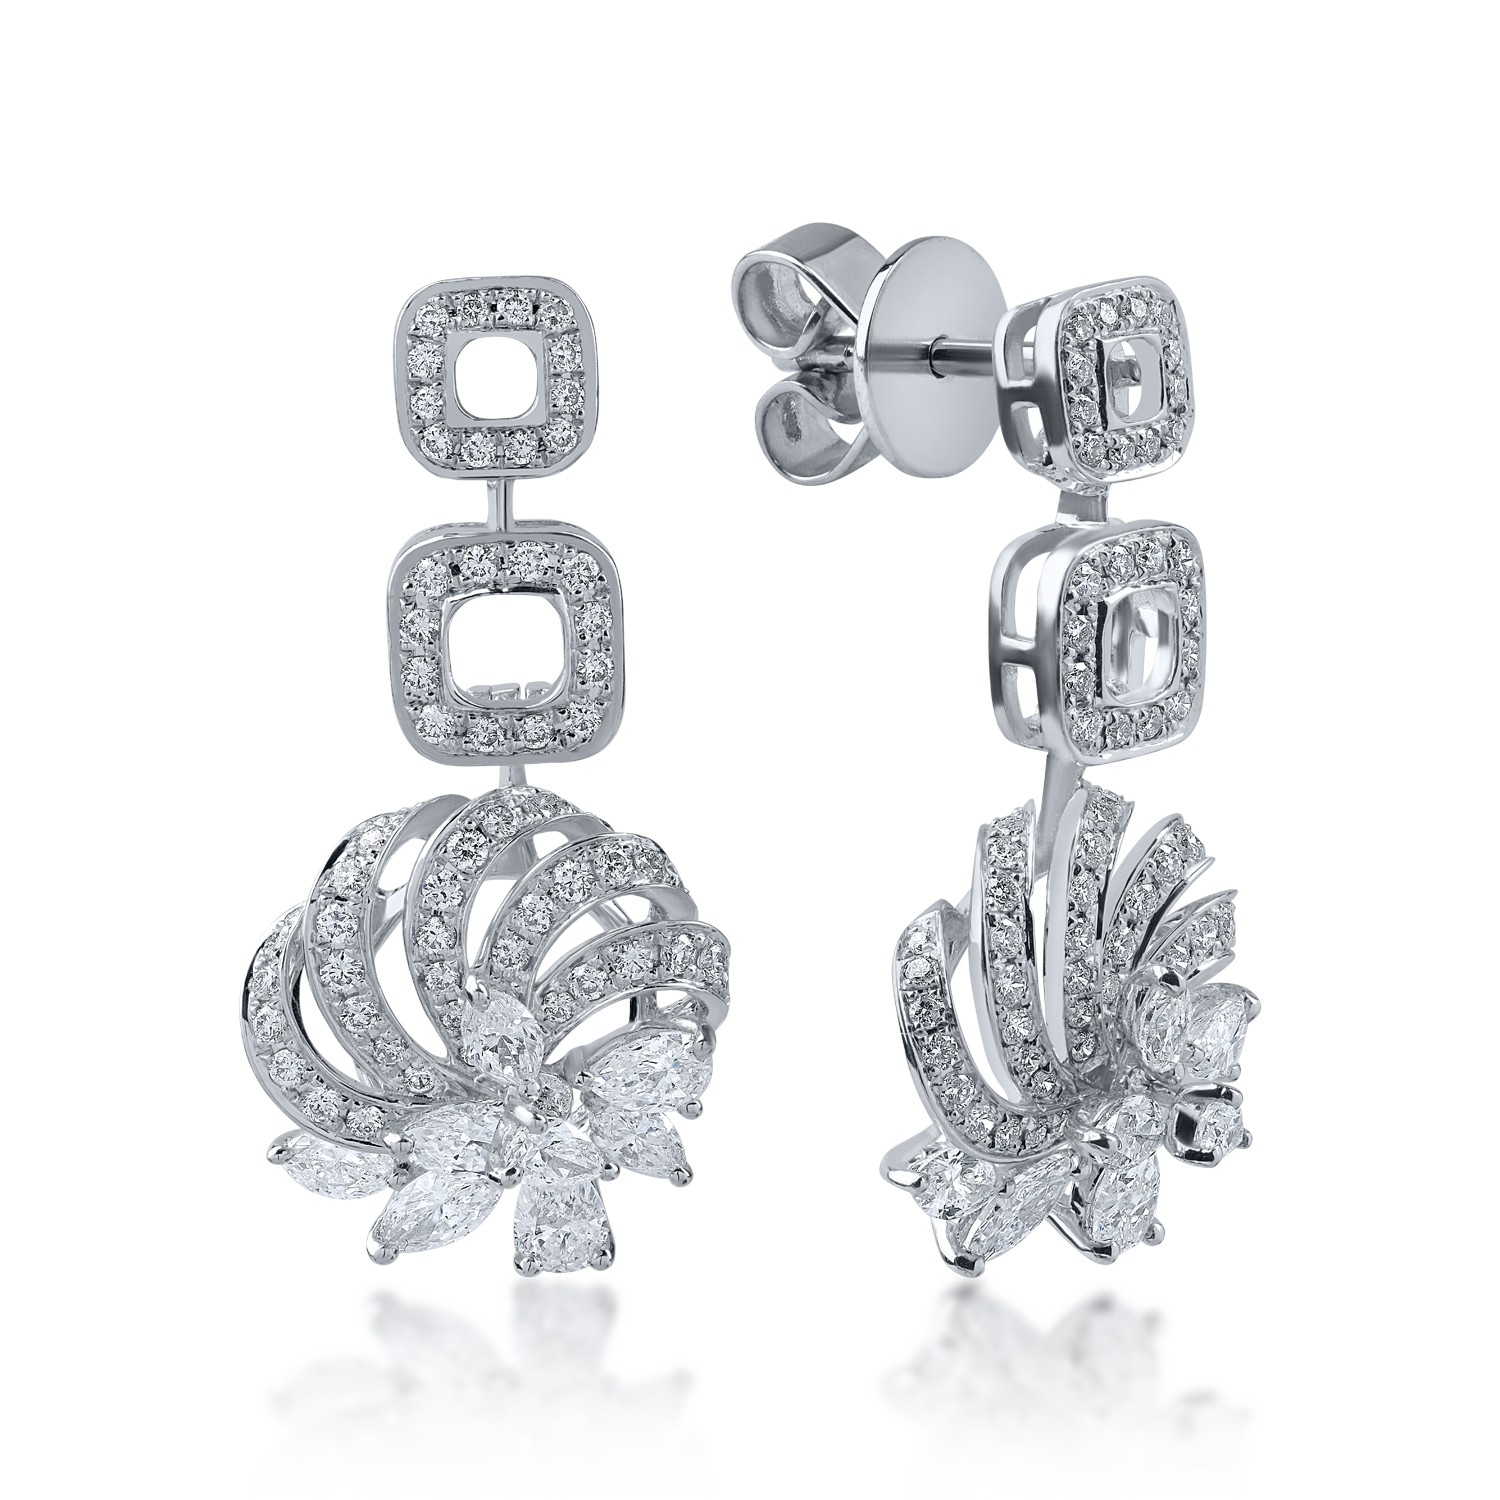 White gold flower earrings with 1.57ct diamonds